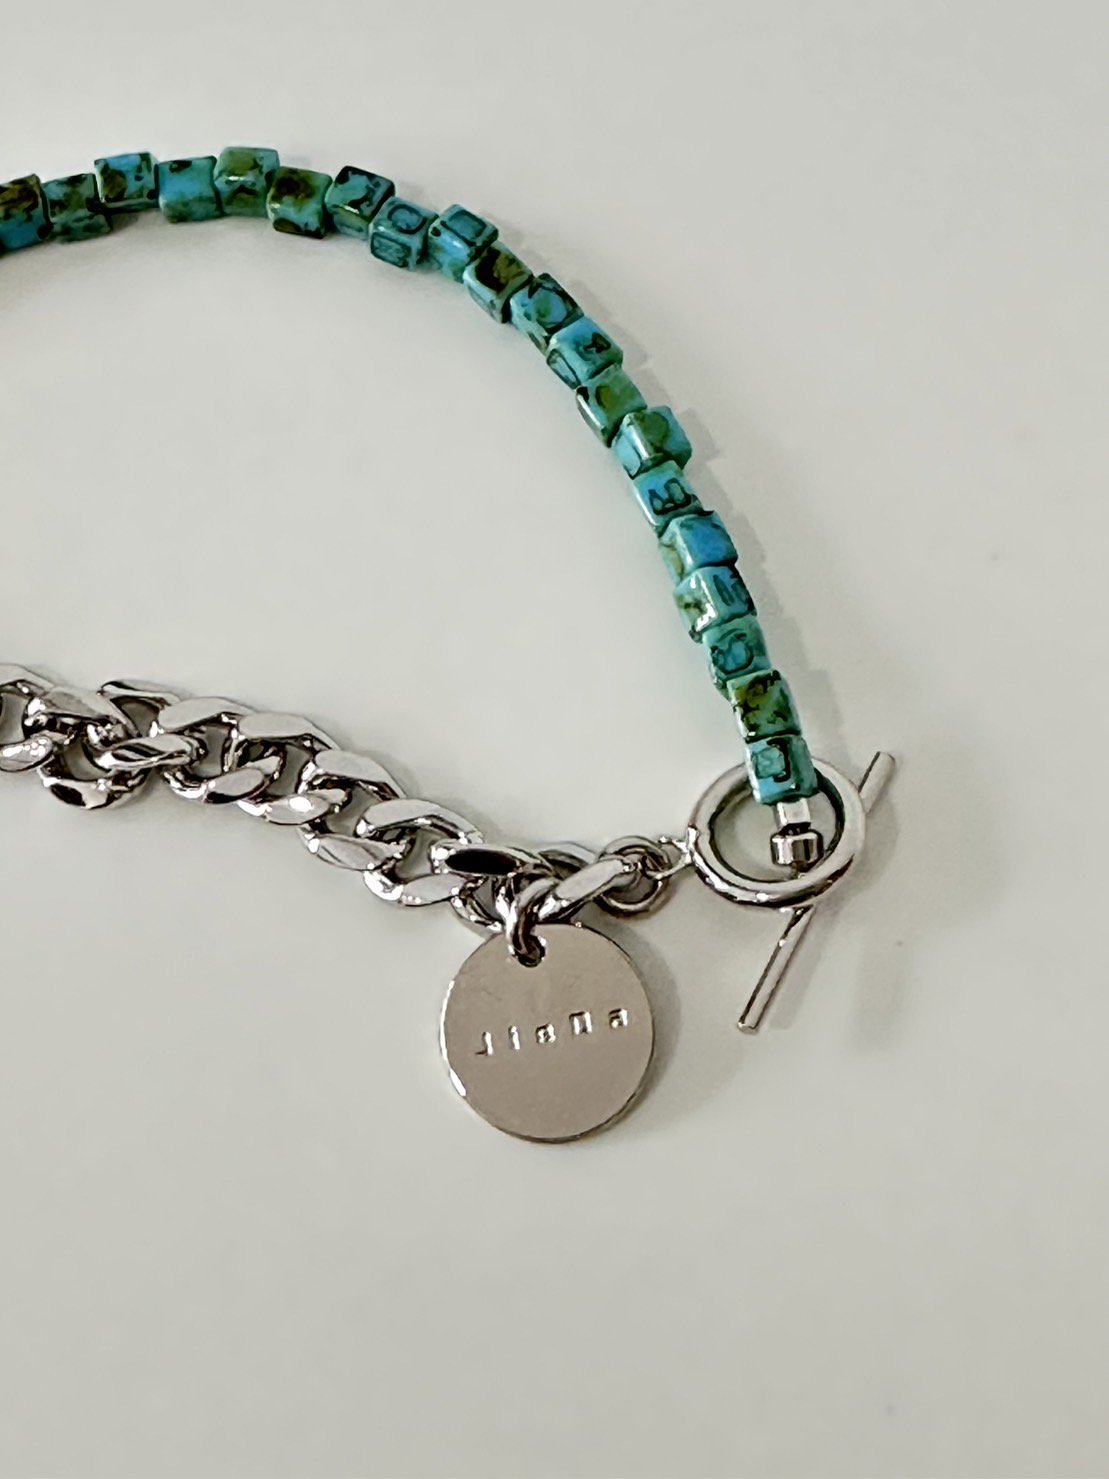 JieDa<br />SWITCHING BEADS BRACELET / TURQUOISE <img class='new_mark_img2' src='https://img.shop-pro.jp/img/new/icons47.gif' style='border:none;display:inline;margin:0px;padding:0px;width:auto;' />